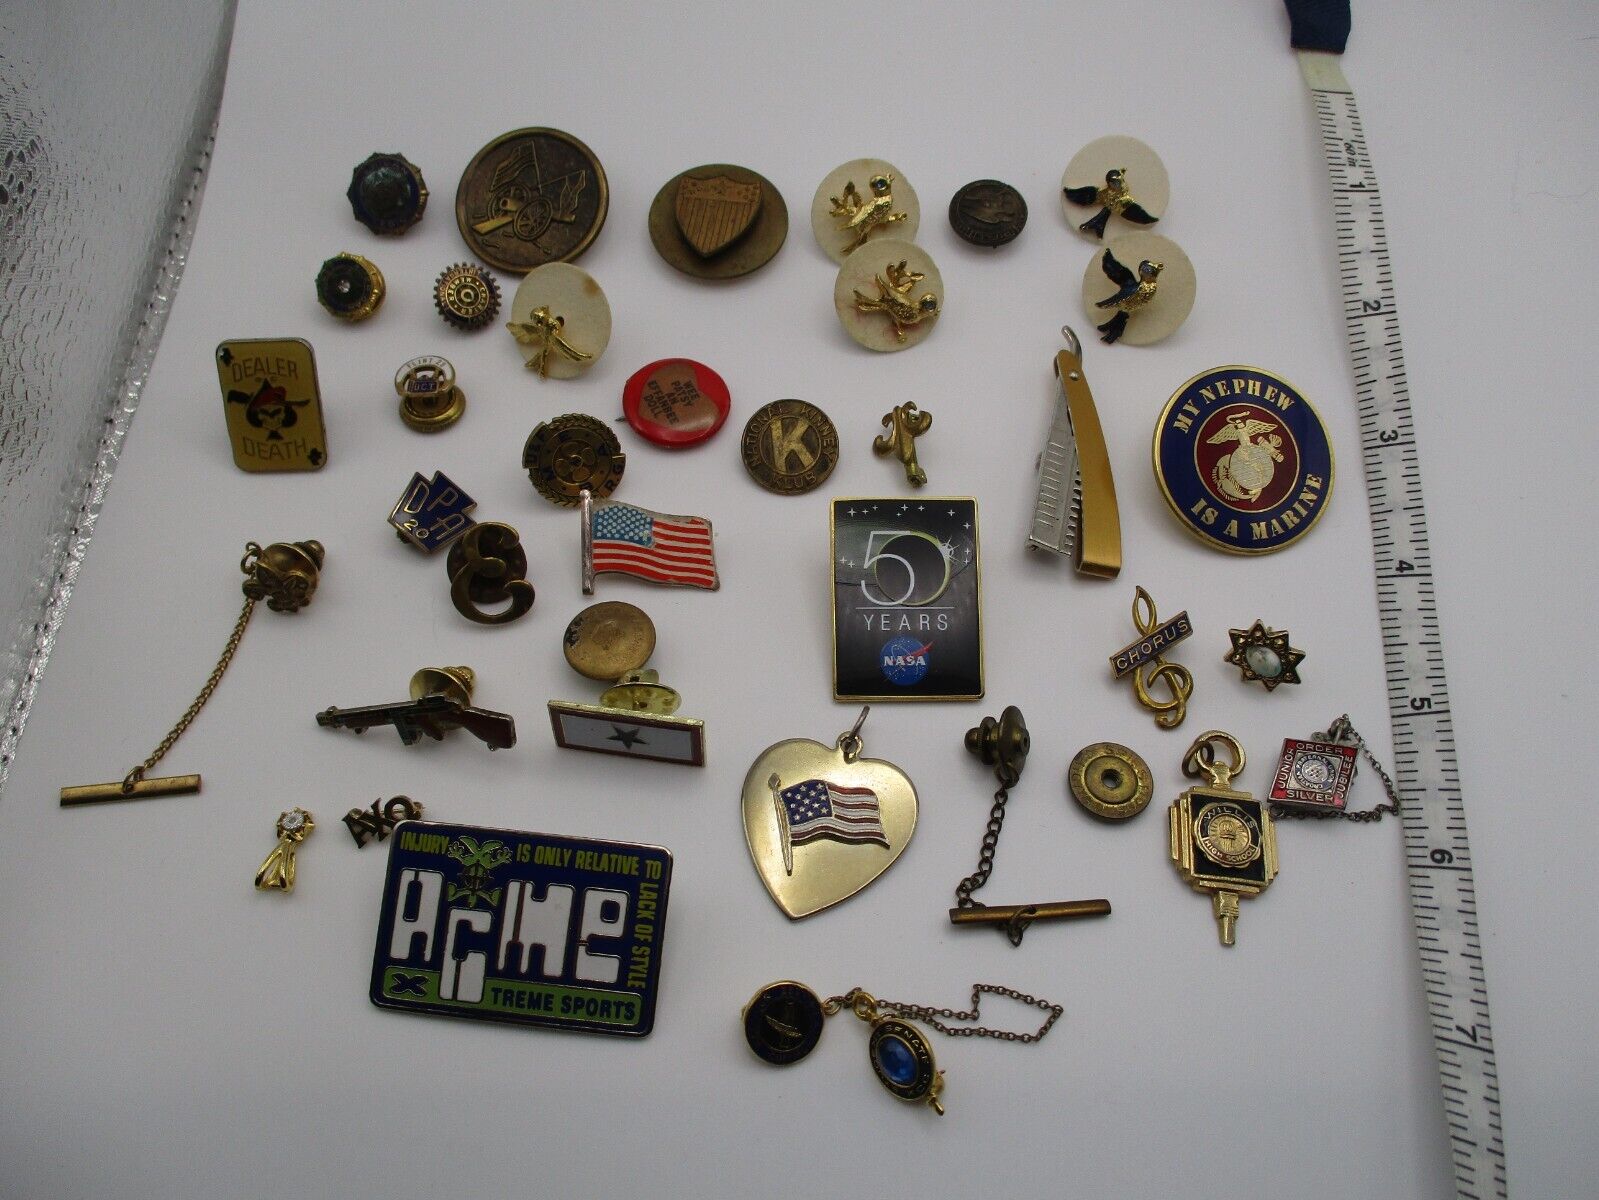 LOT OF 38 VINTAGE PINS / CUFF LINKS / BUTTONS